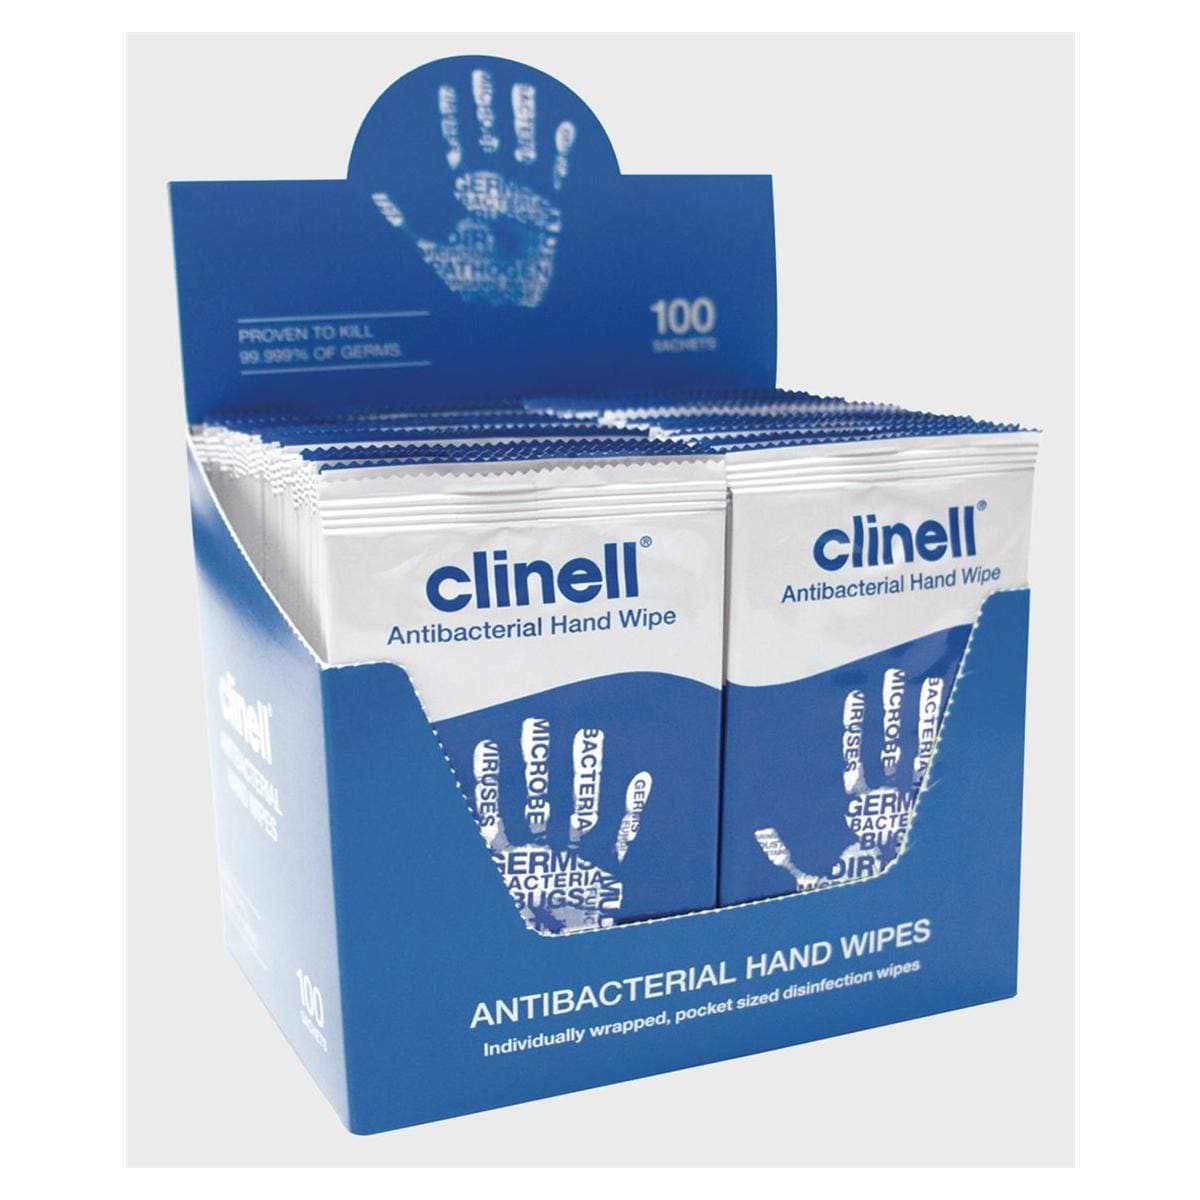 Clinell Antimicrobial Hand Wipes 100pk